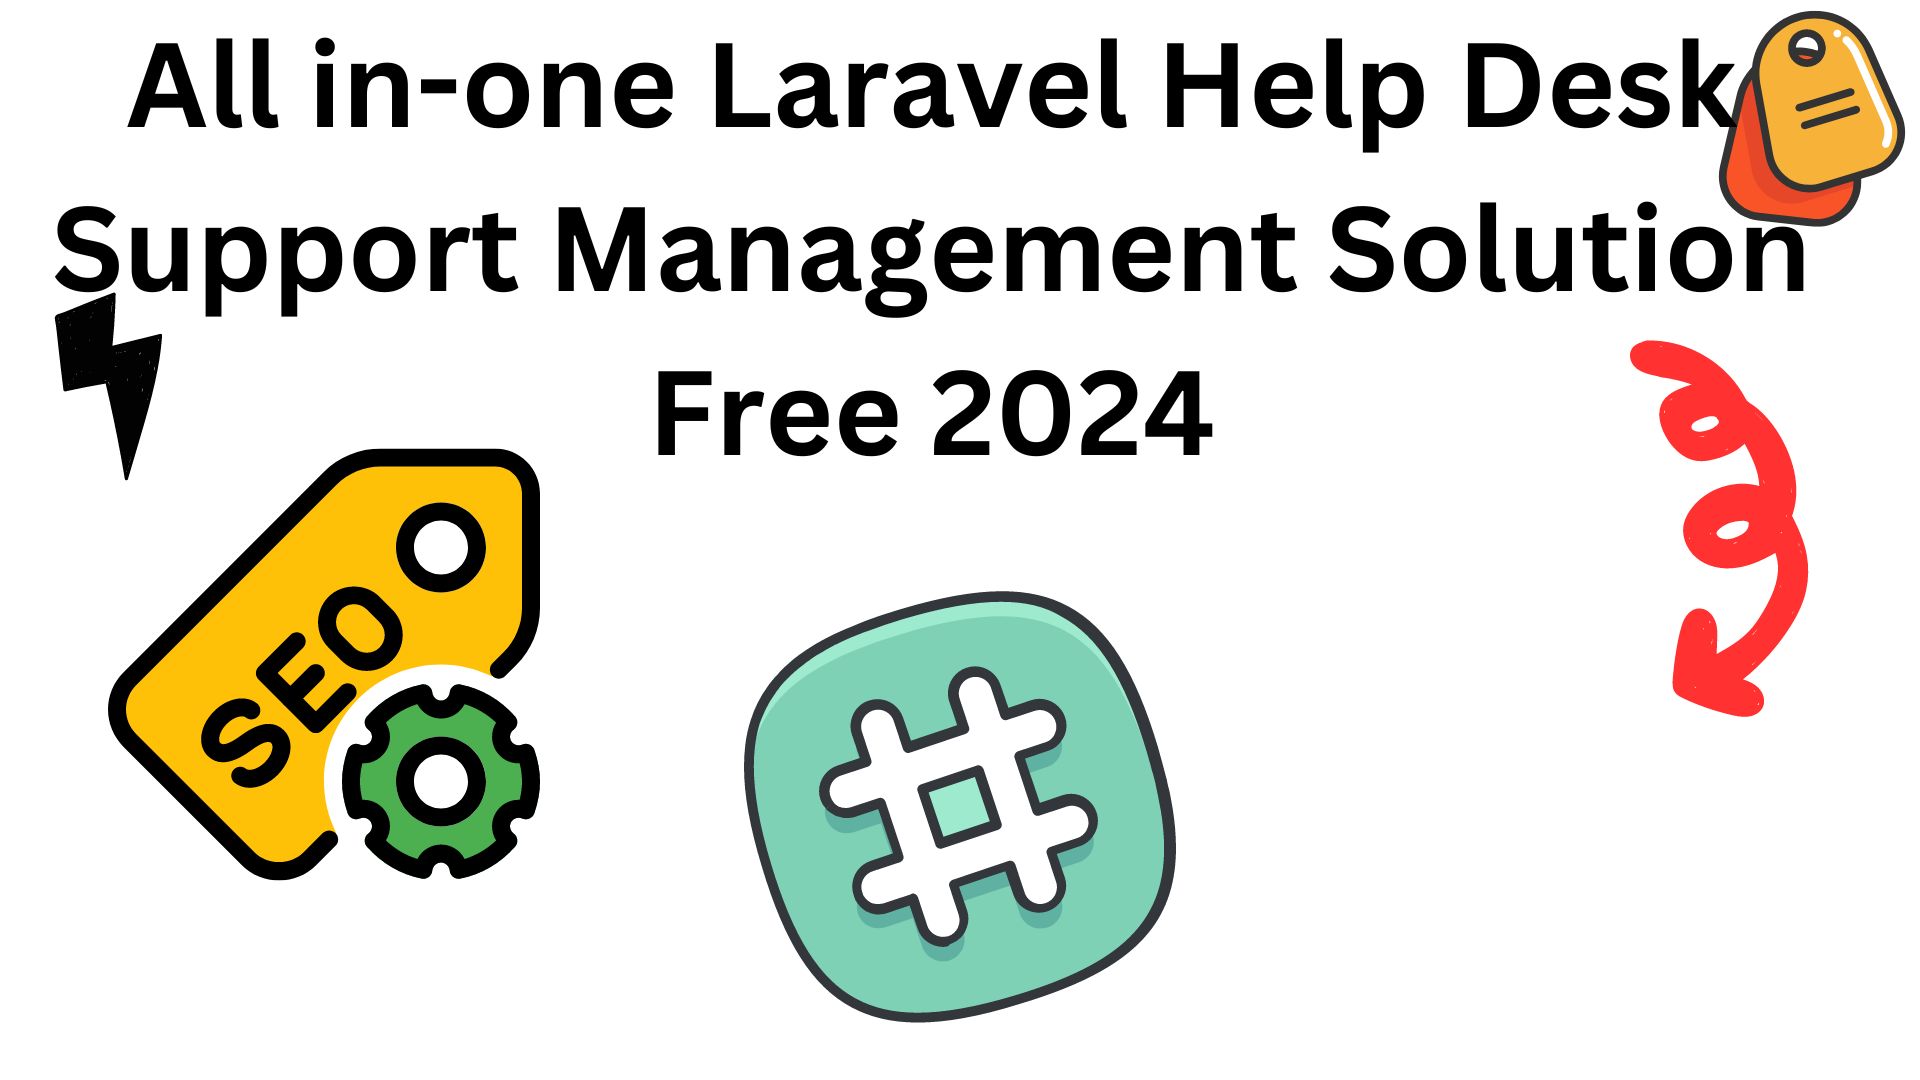 All In-One Laravel Help Desk Support Management Solution Free 2024